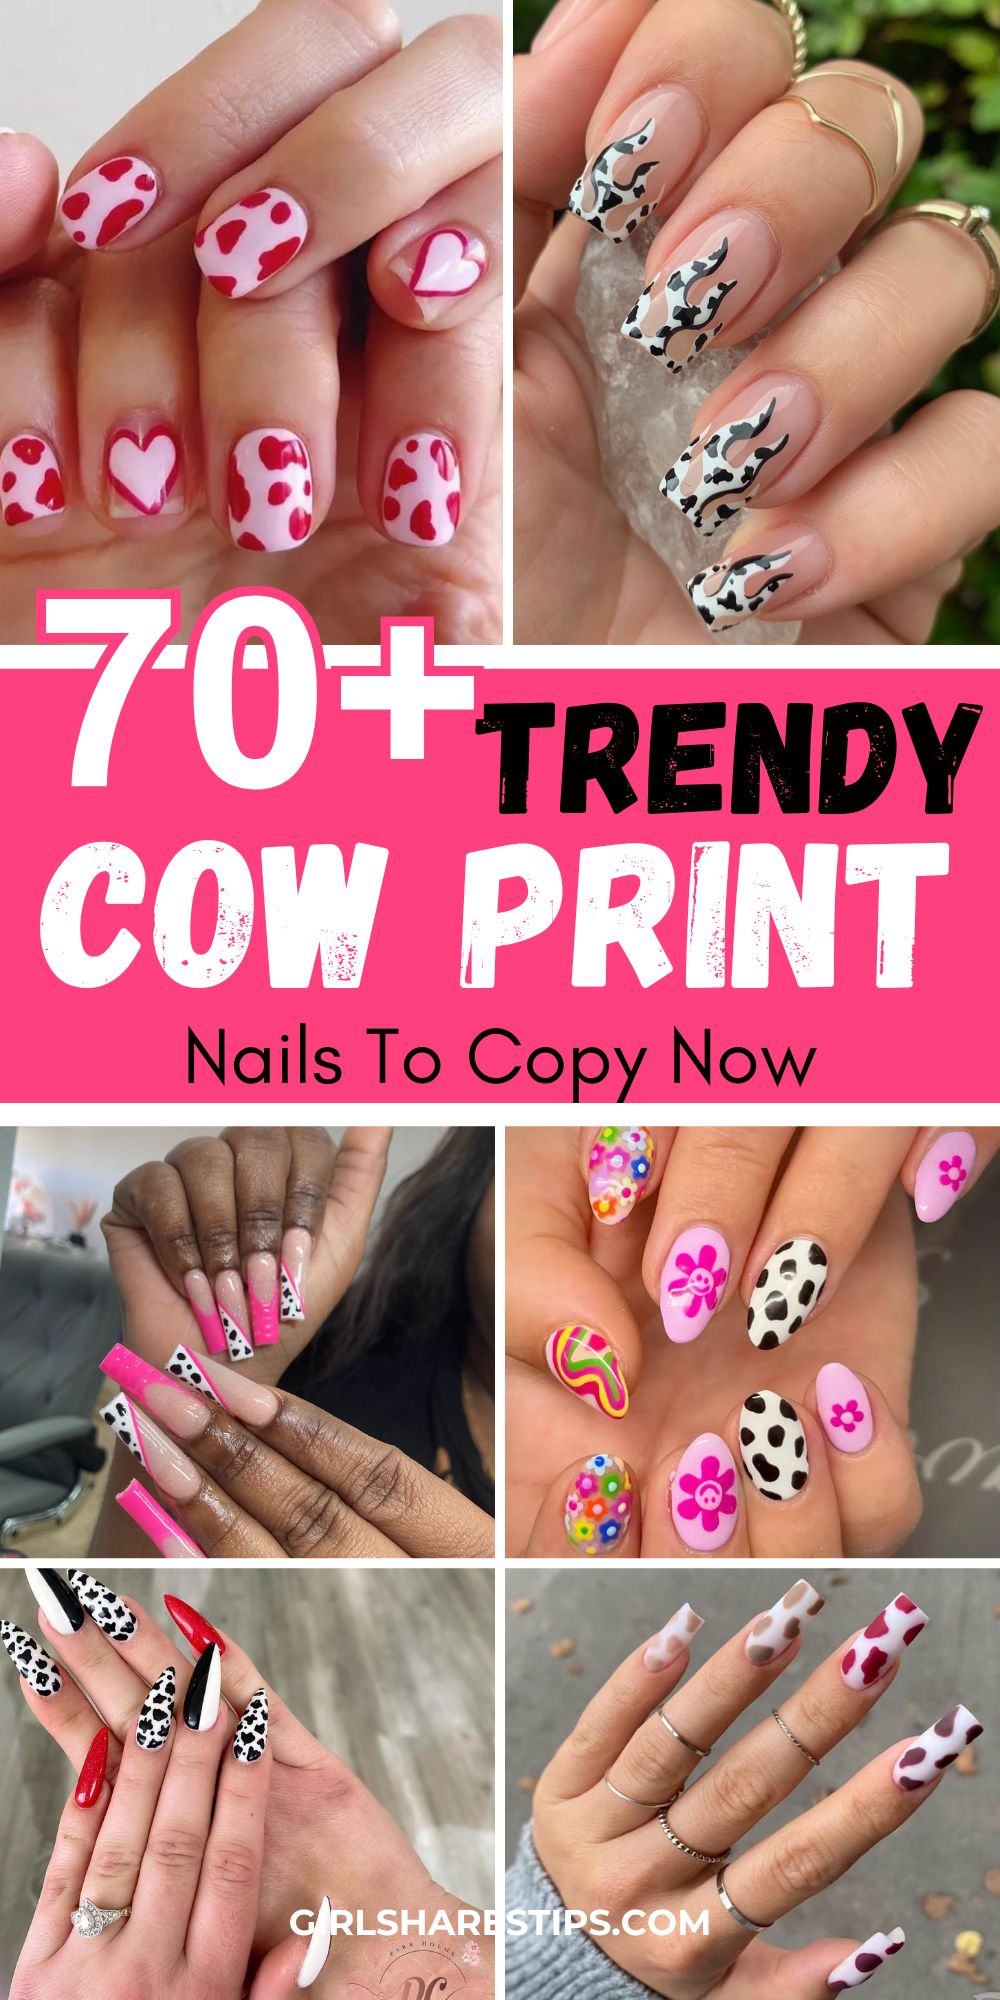 cow print nails collage